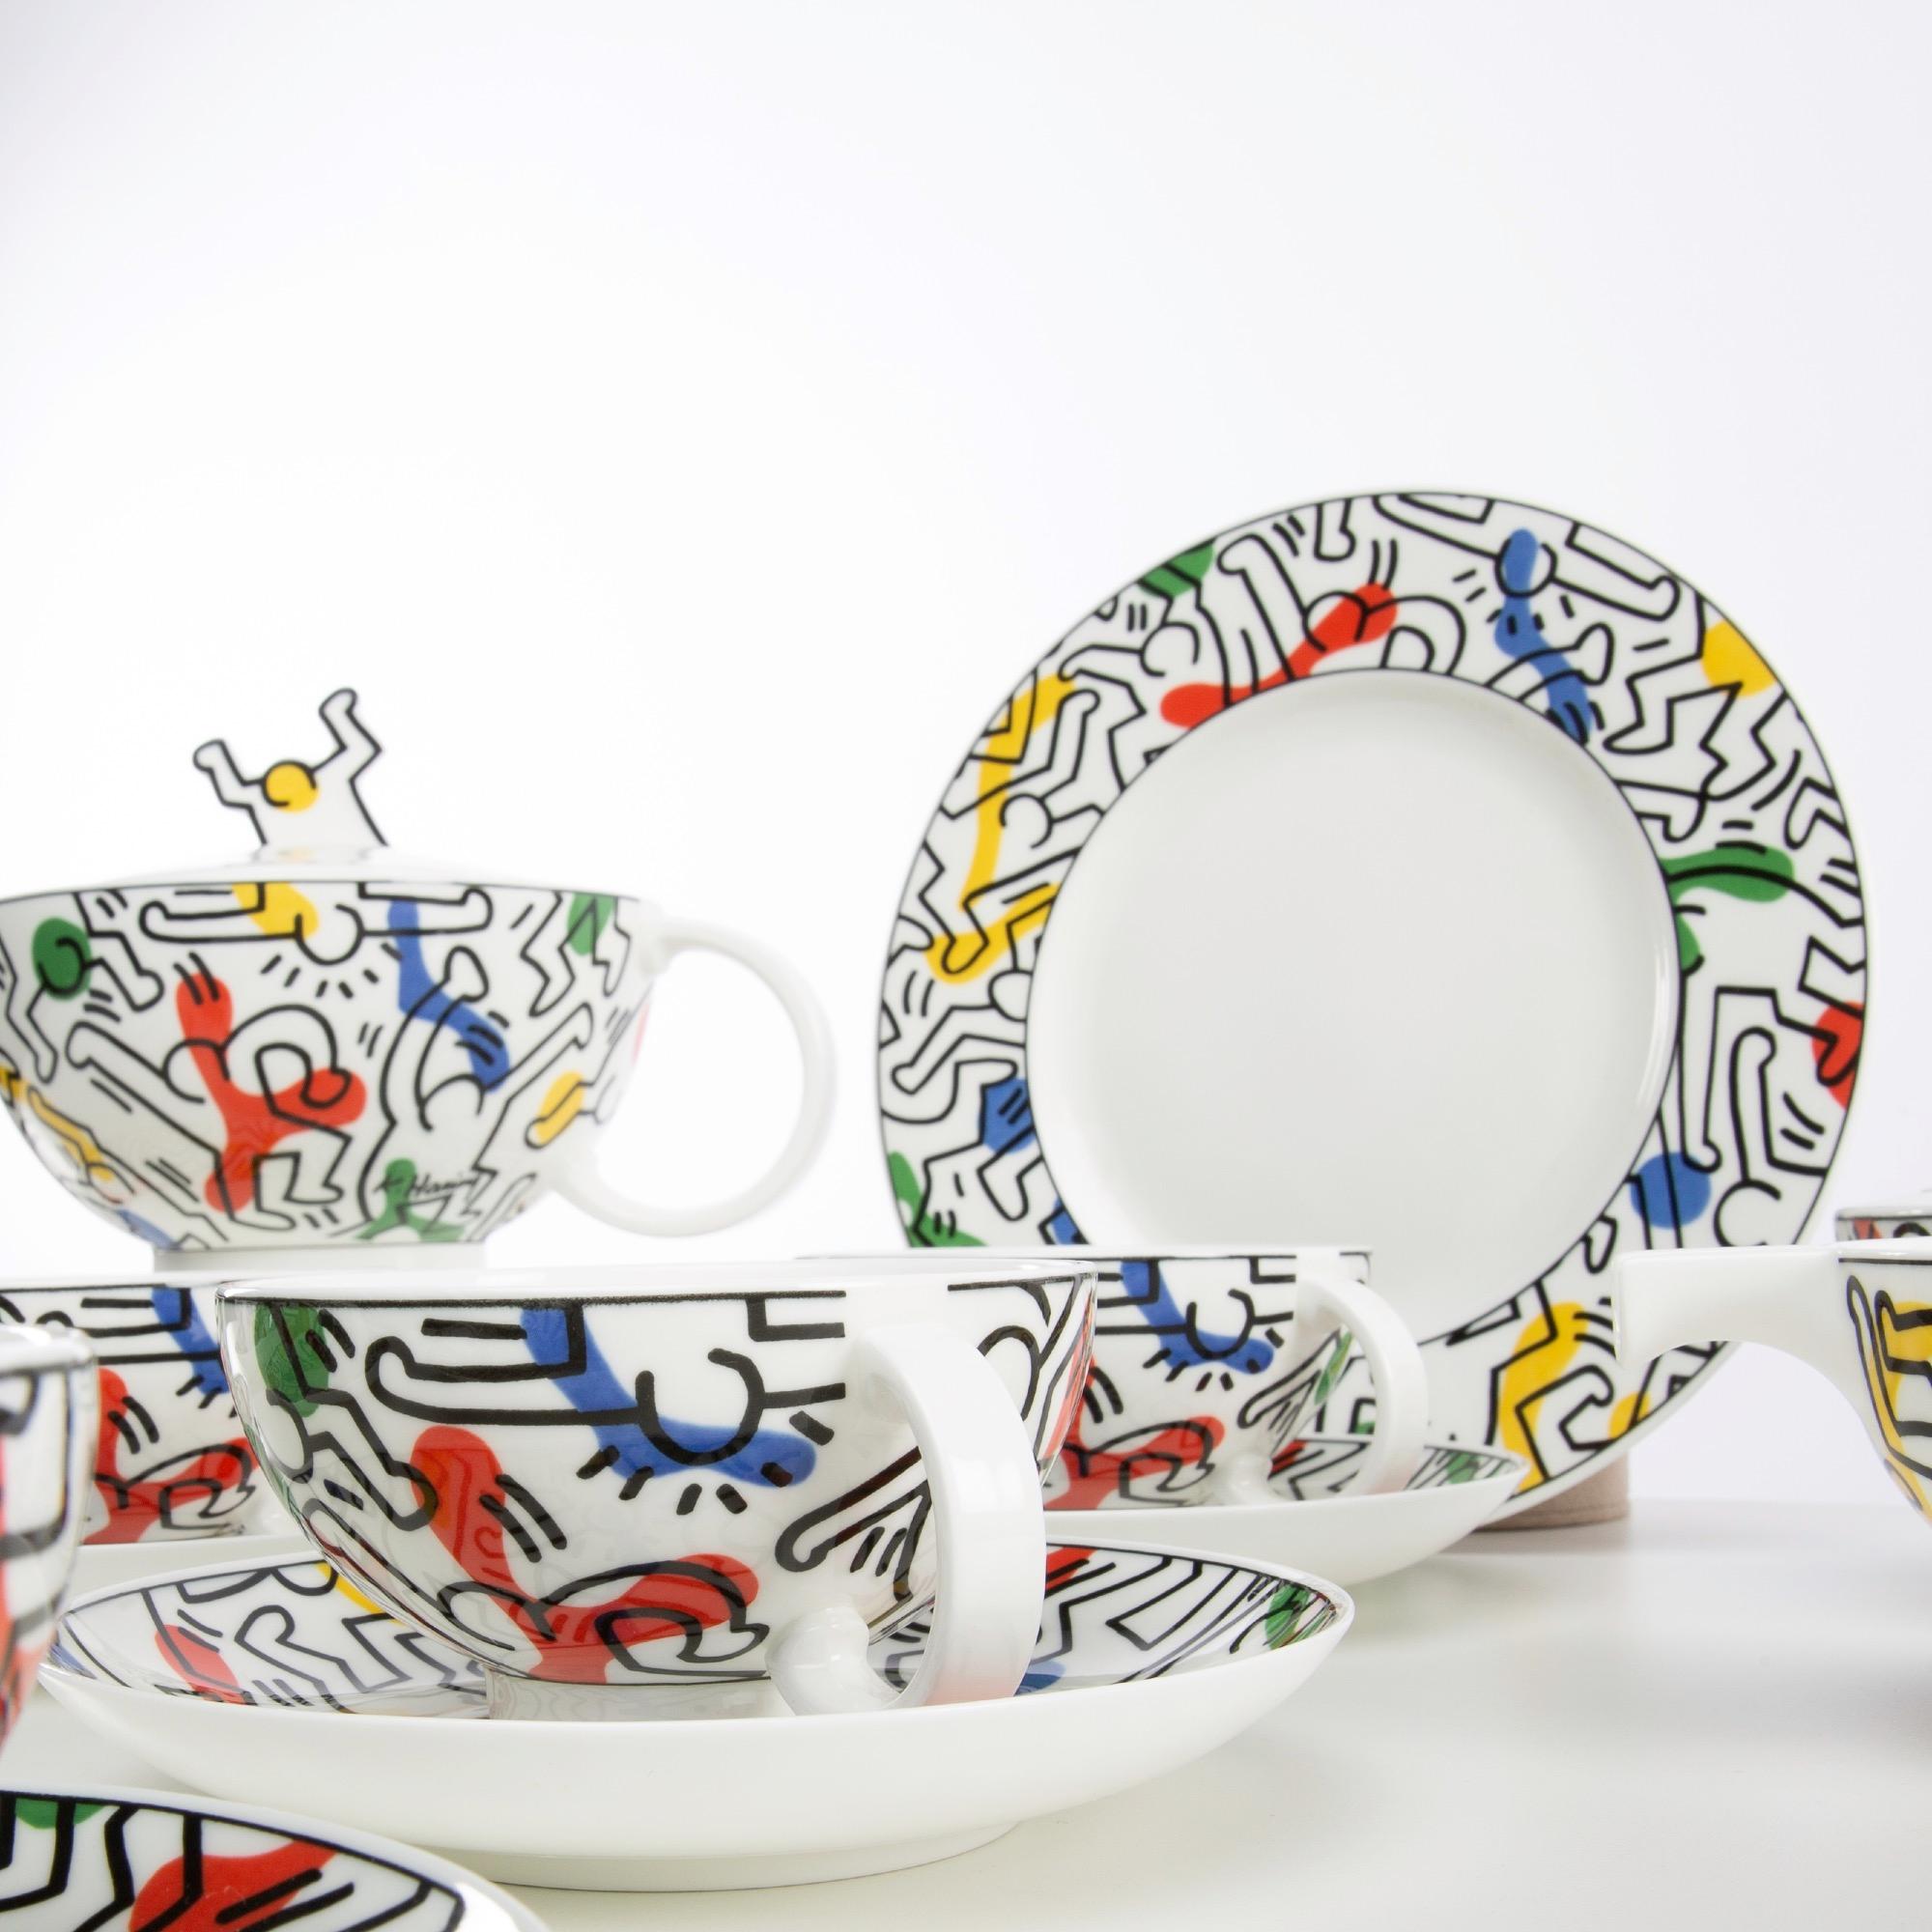 Villeroy & Boch porcelain tea set, decorated with drawings by Keith Haring, produced in 1991.
Limited to 500 copies
Please note that the large serving dish and the certificate are missing.
Measures: 1x creamer (Height 6 cm / diameter 10 cm)
1x